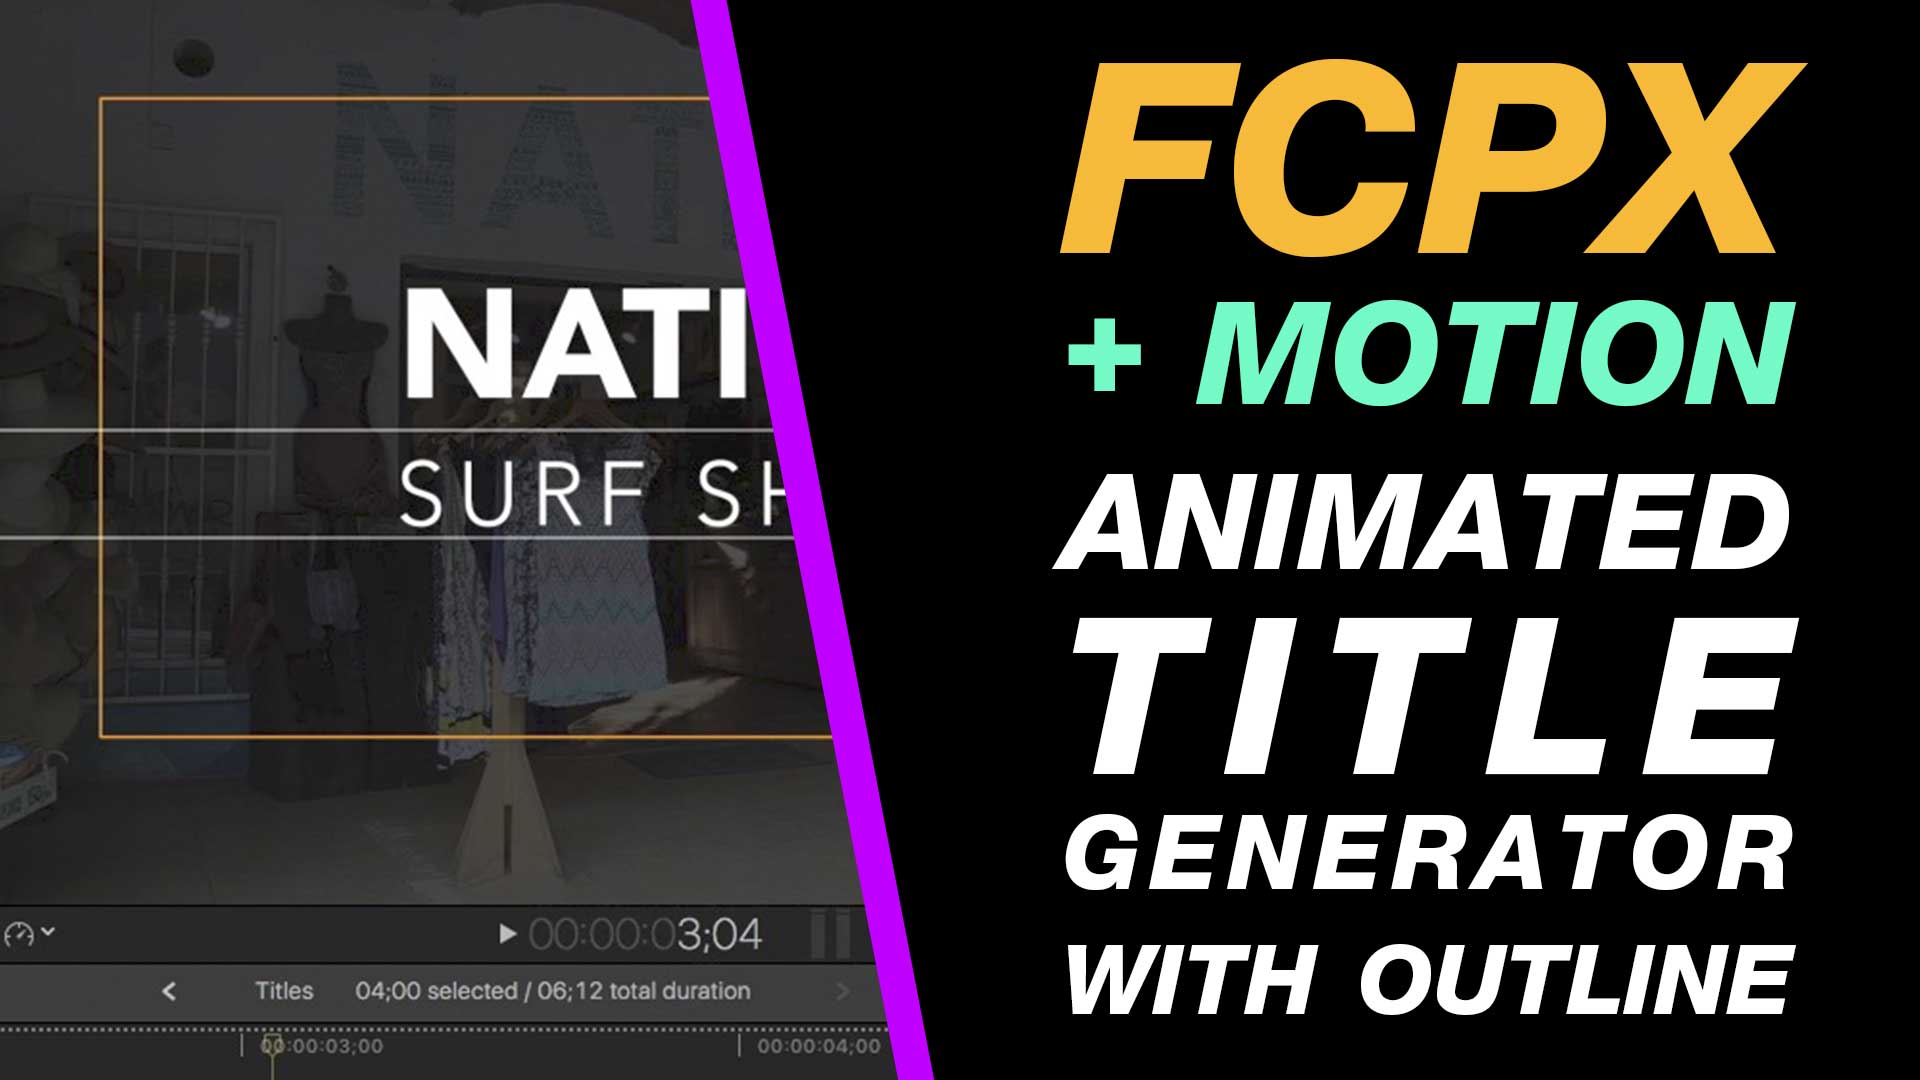 Final Cut Pro X & Apple Motion: Stylish Animated Title Generator with Outline #fcpx